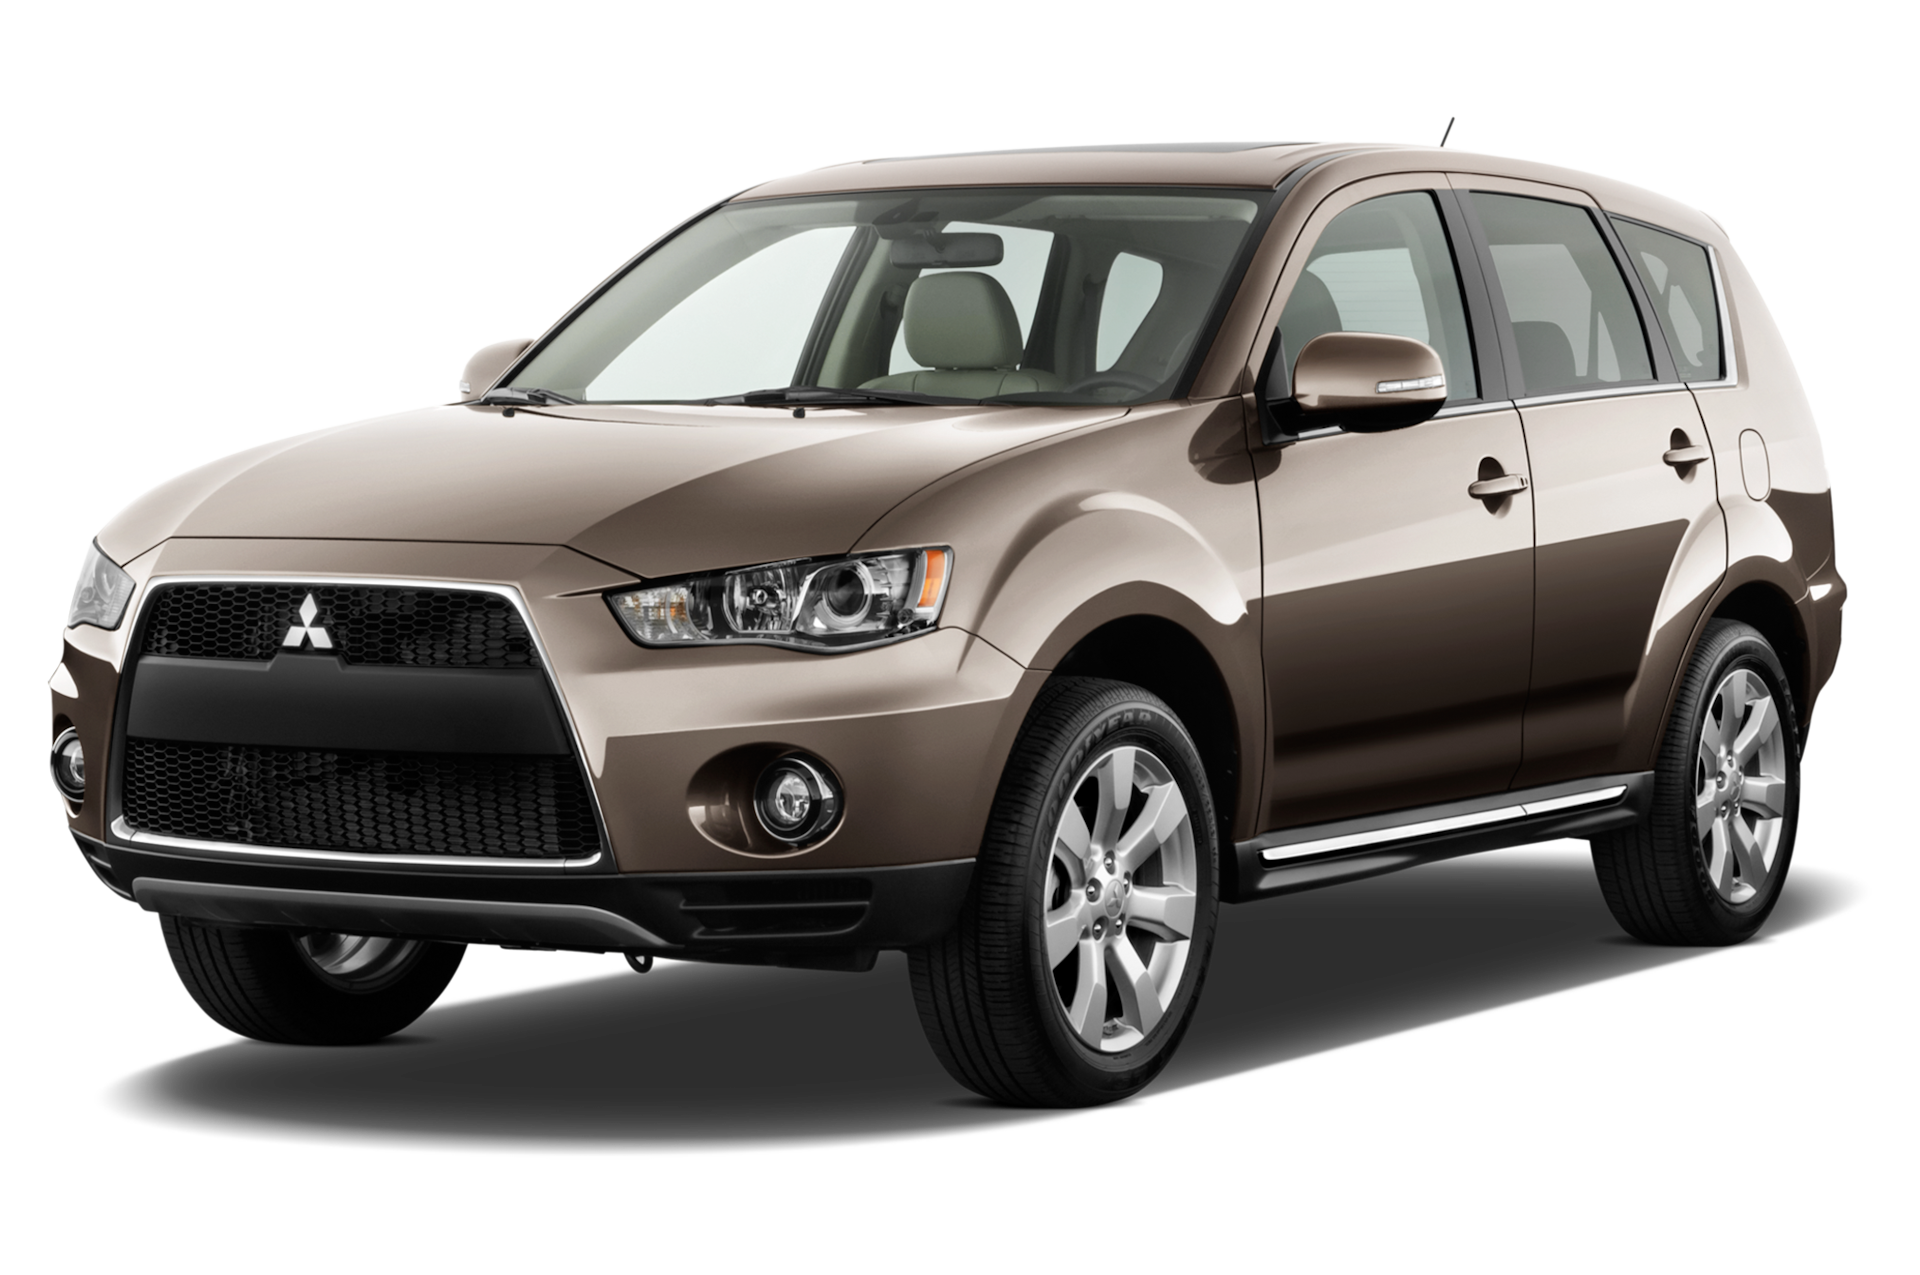 2012 Mitsubishi Outlander Prices, Reviews, and Photos - MotorTrend